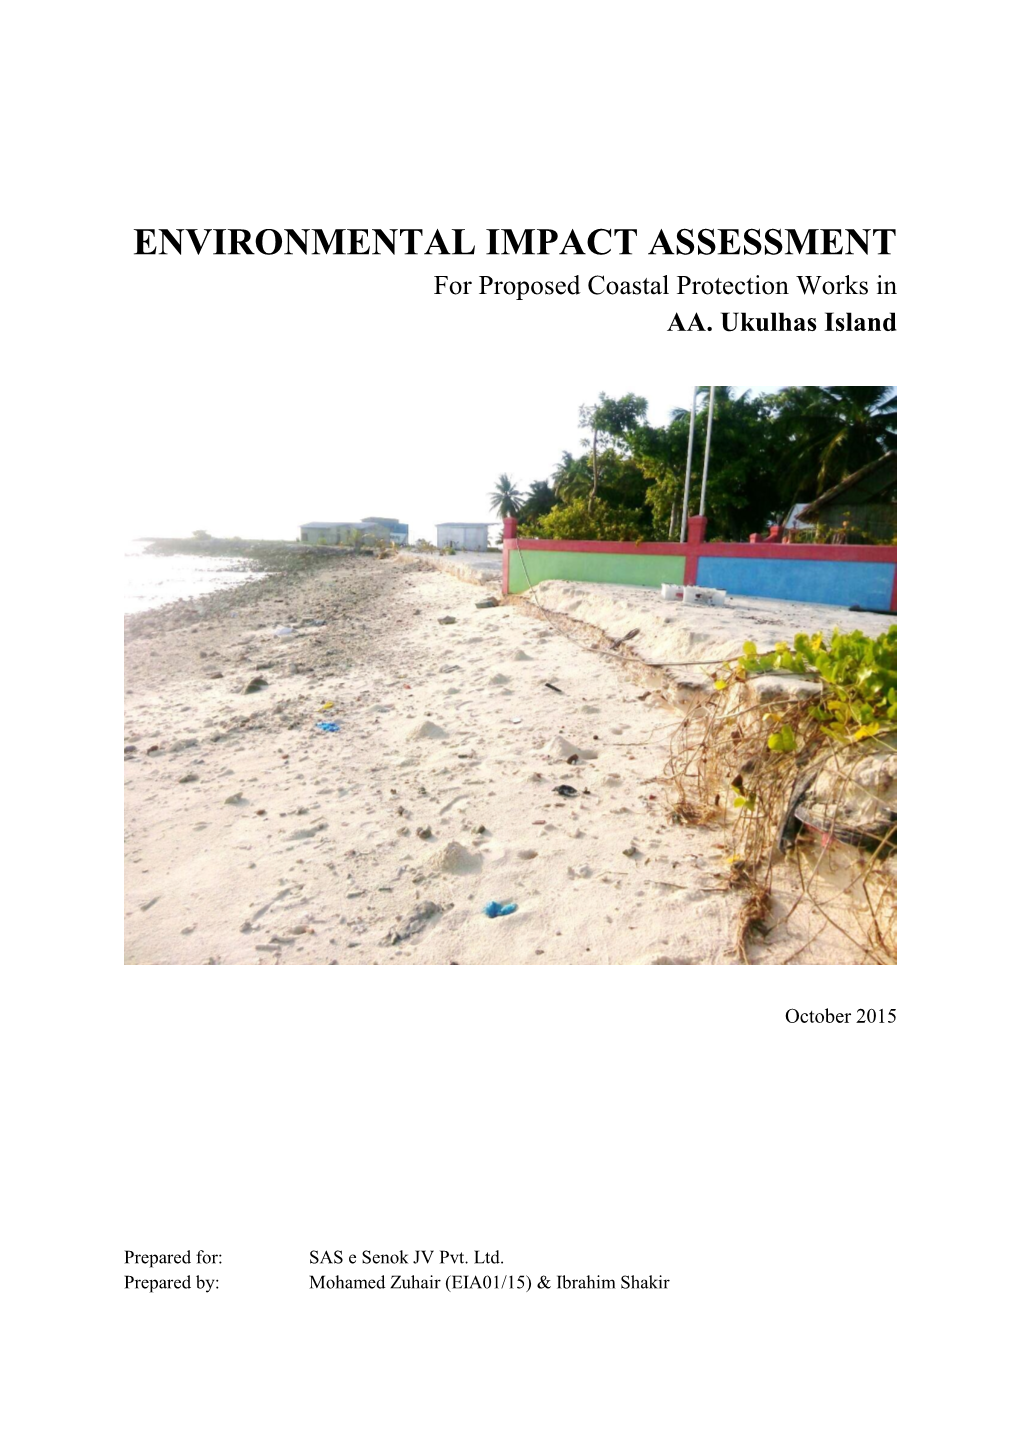 ENVIRONMENTAL IMPACT ASSESSMENT for Proposed Coastal Protection Works in AA